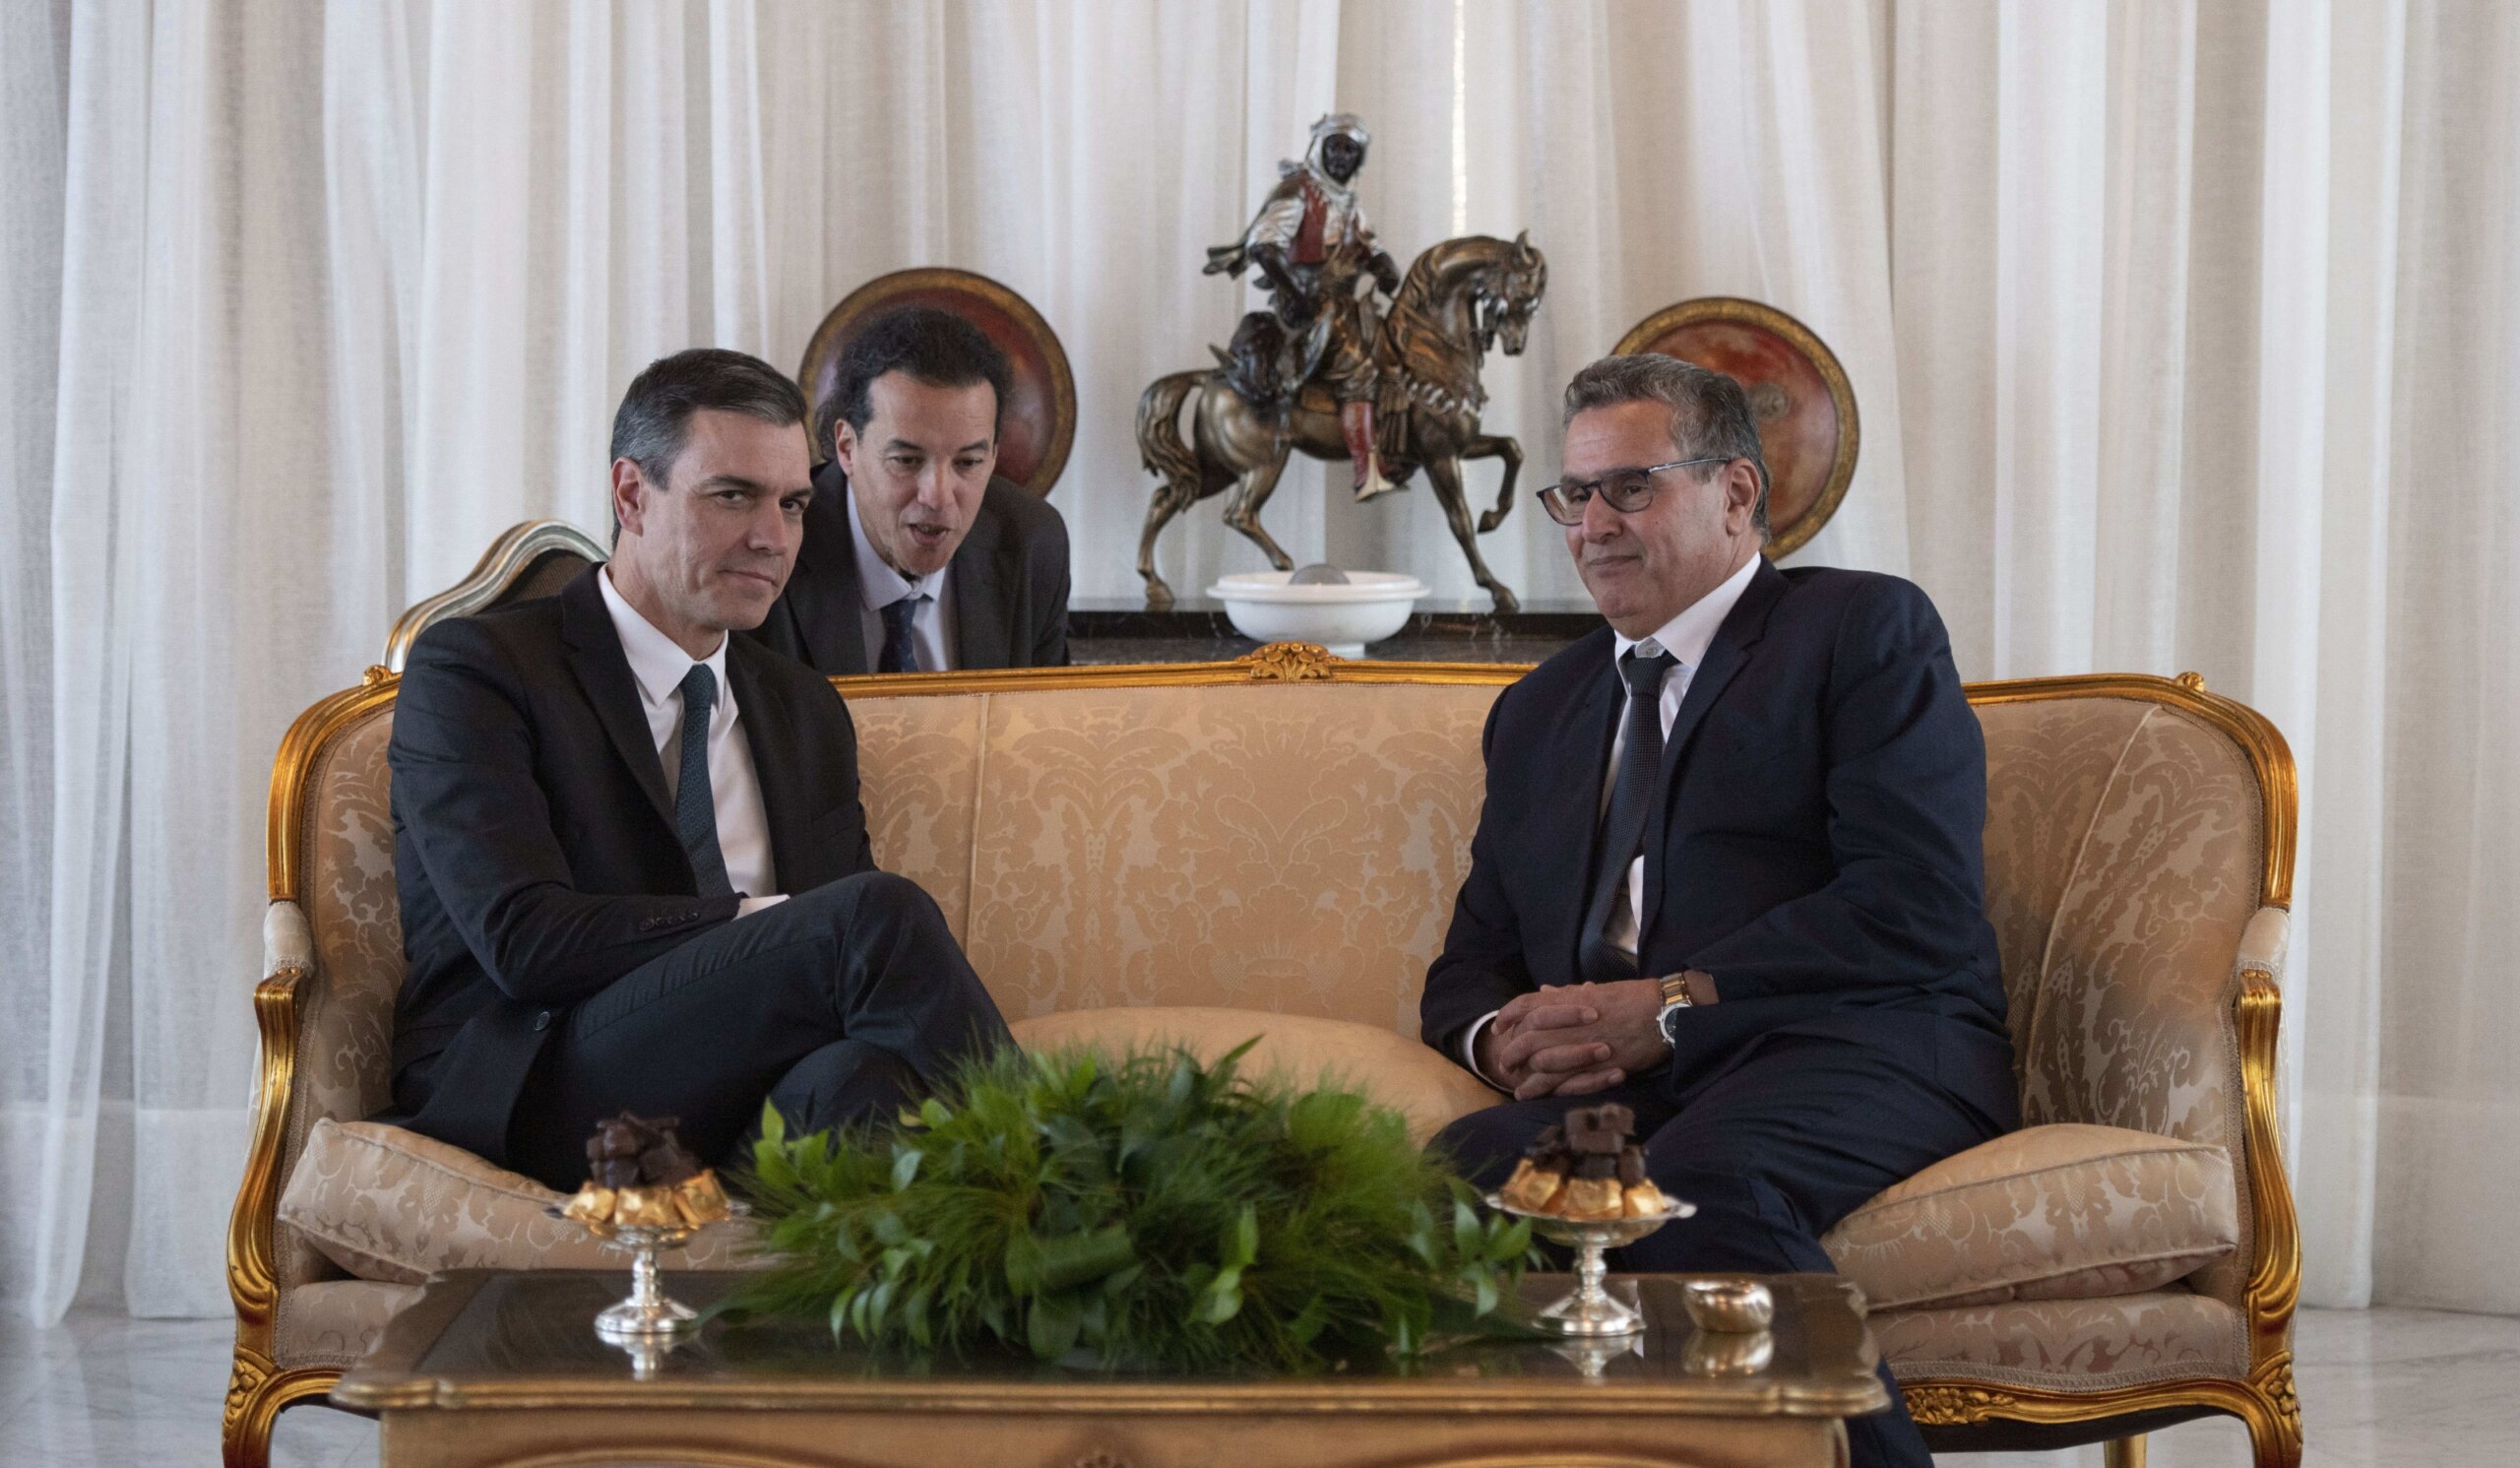 Spanish, Moroccan prime ministers meet to improve ties